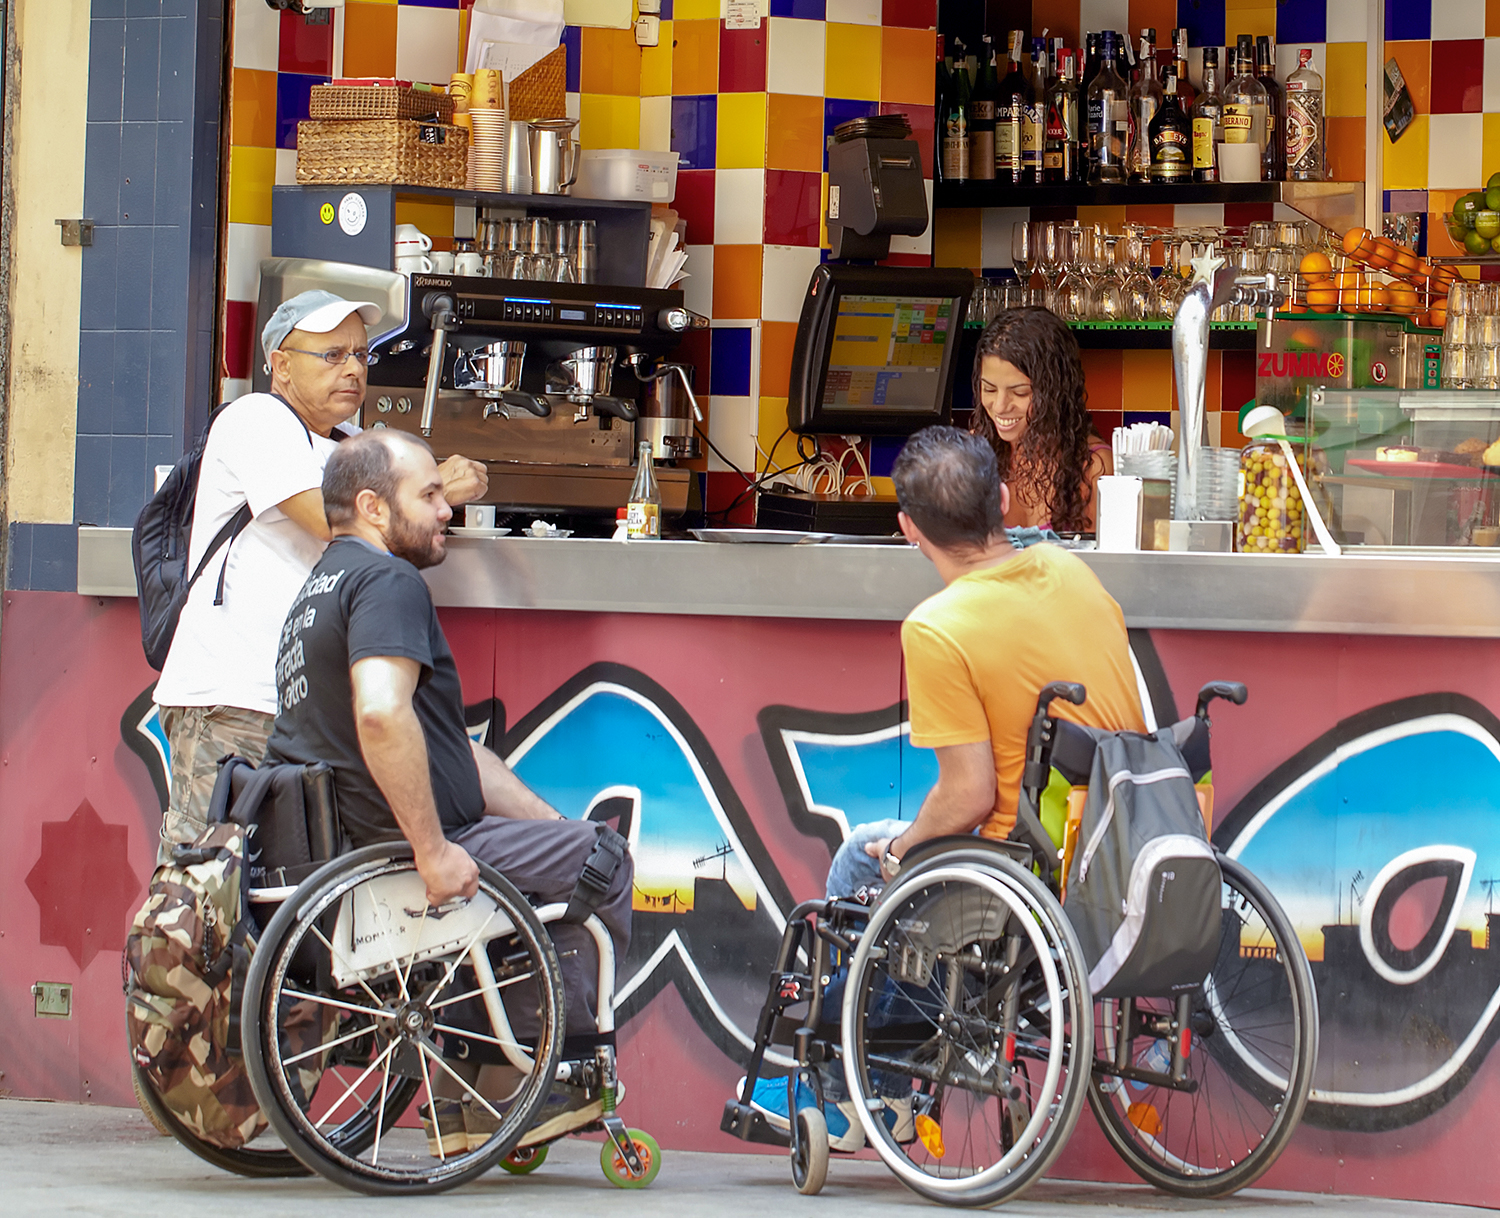 Two men in wheelchairs ordering coffees at a street stand with an onlooker standing next to them.